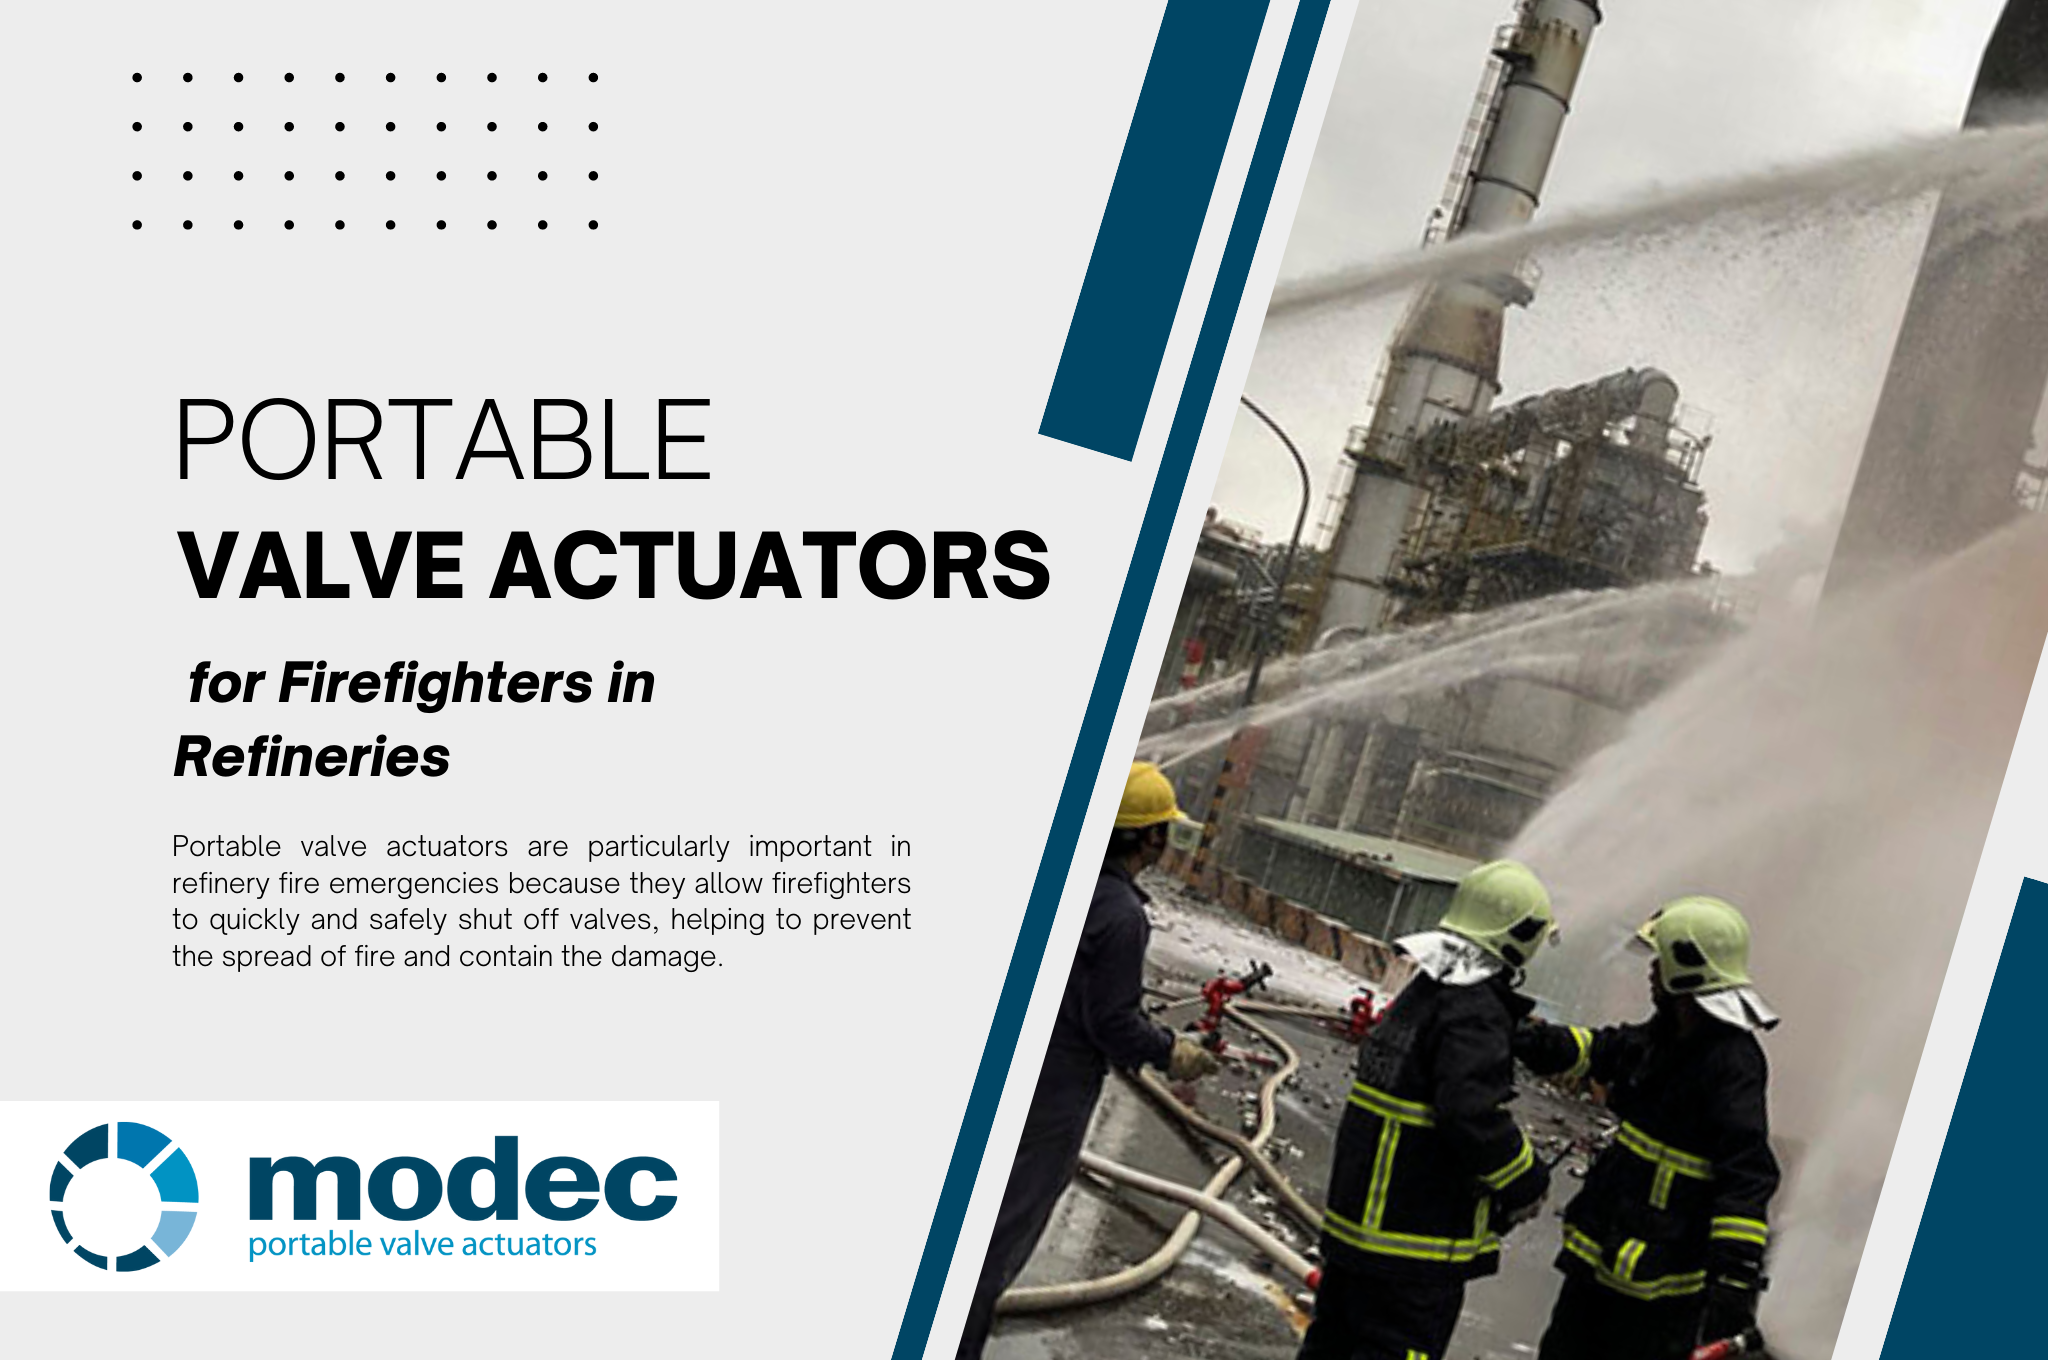 Portable Valve Actuators for Firefighters in Refineries